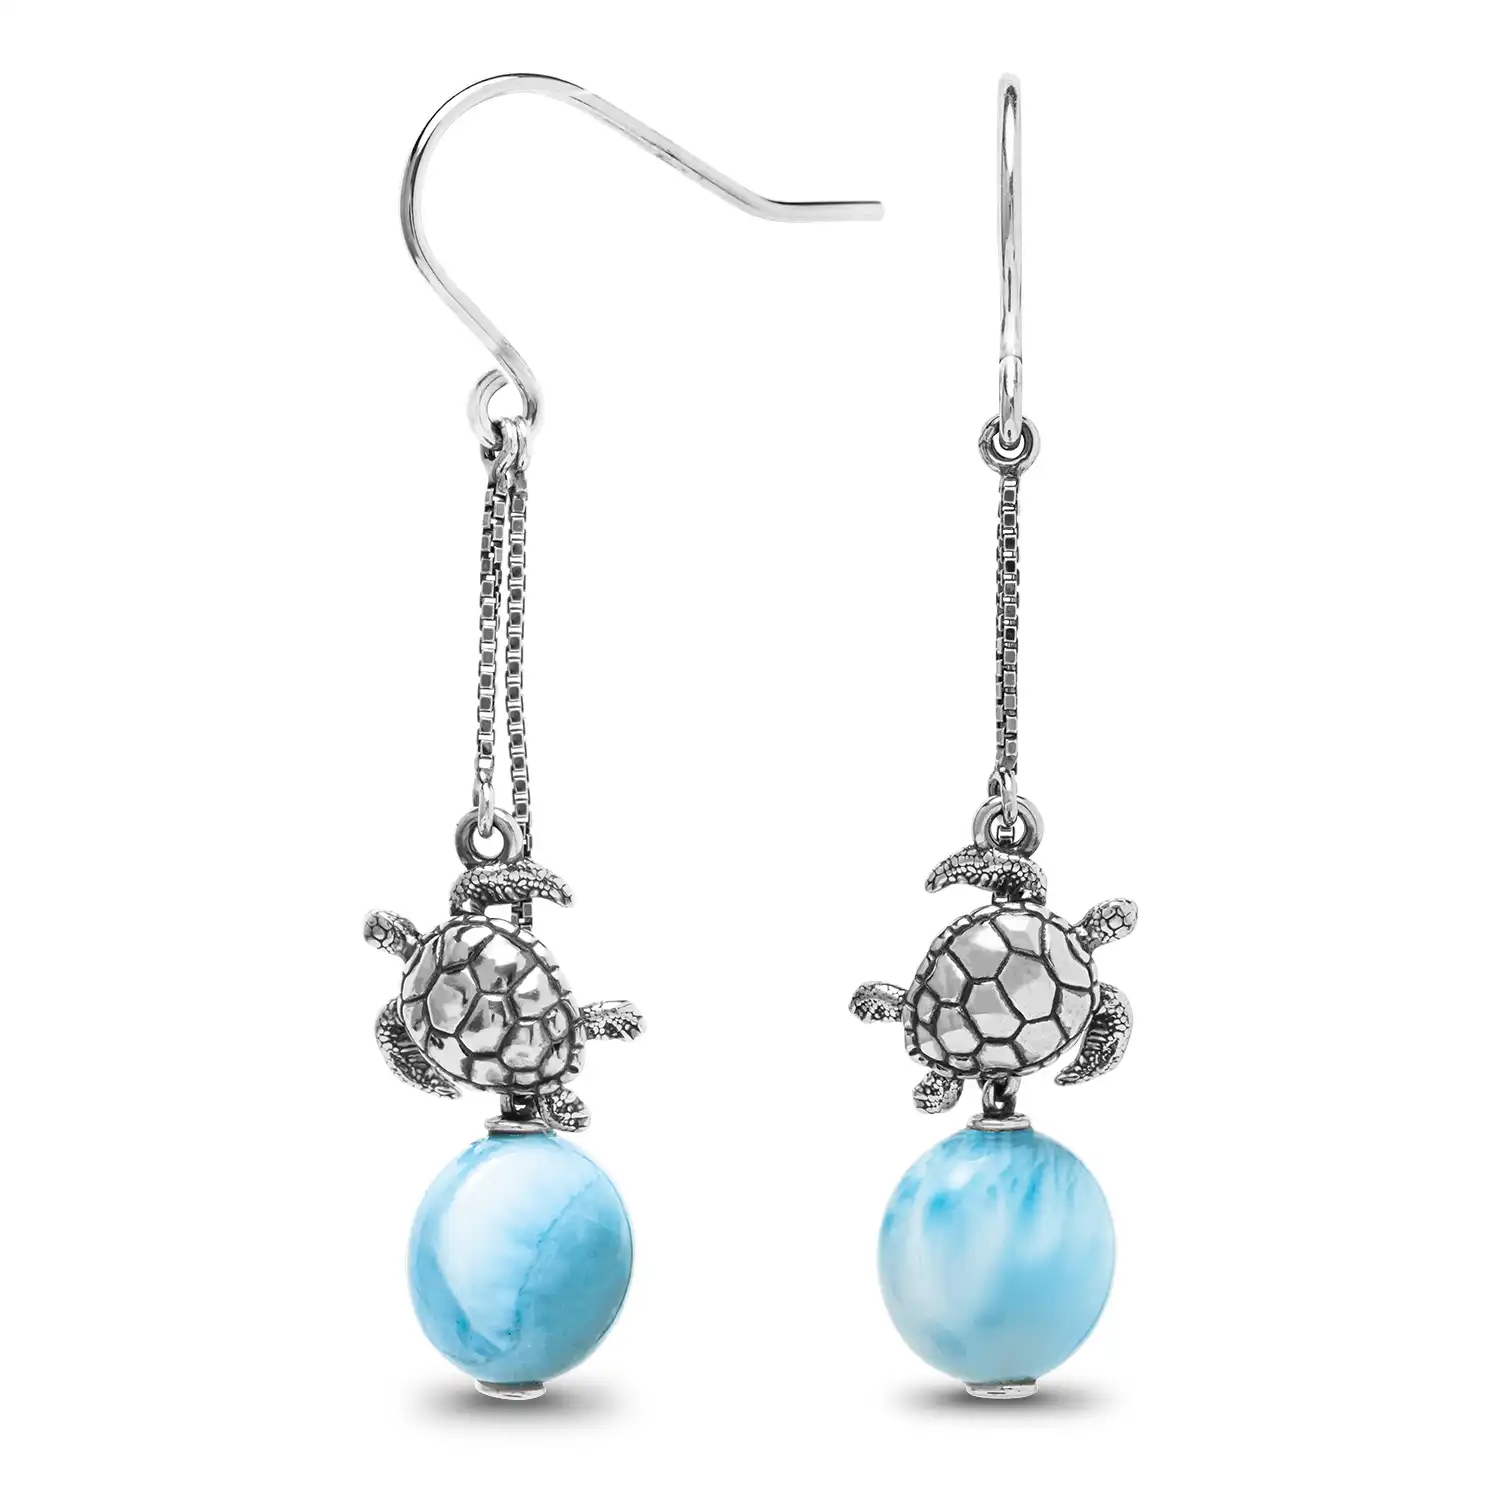 Shop the best selling collection of larimar Jewelry by Marahlago